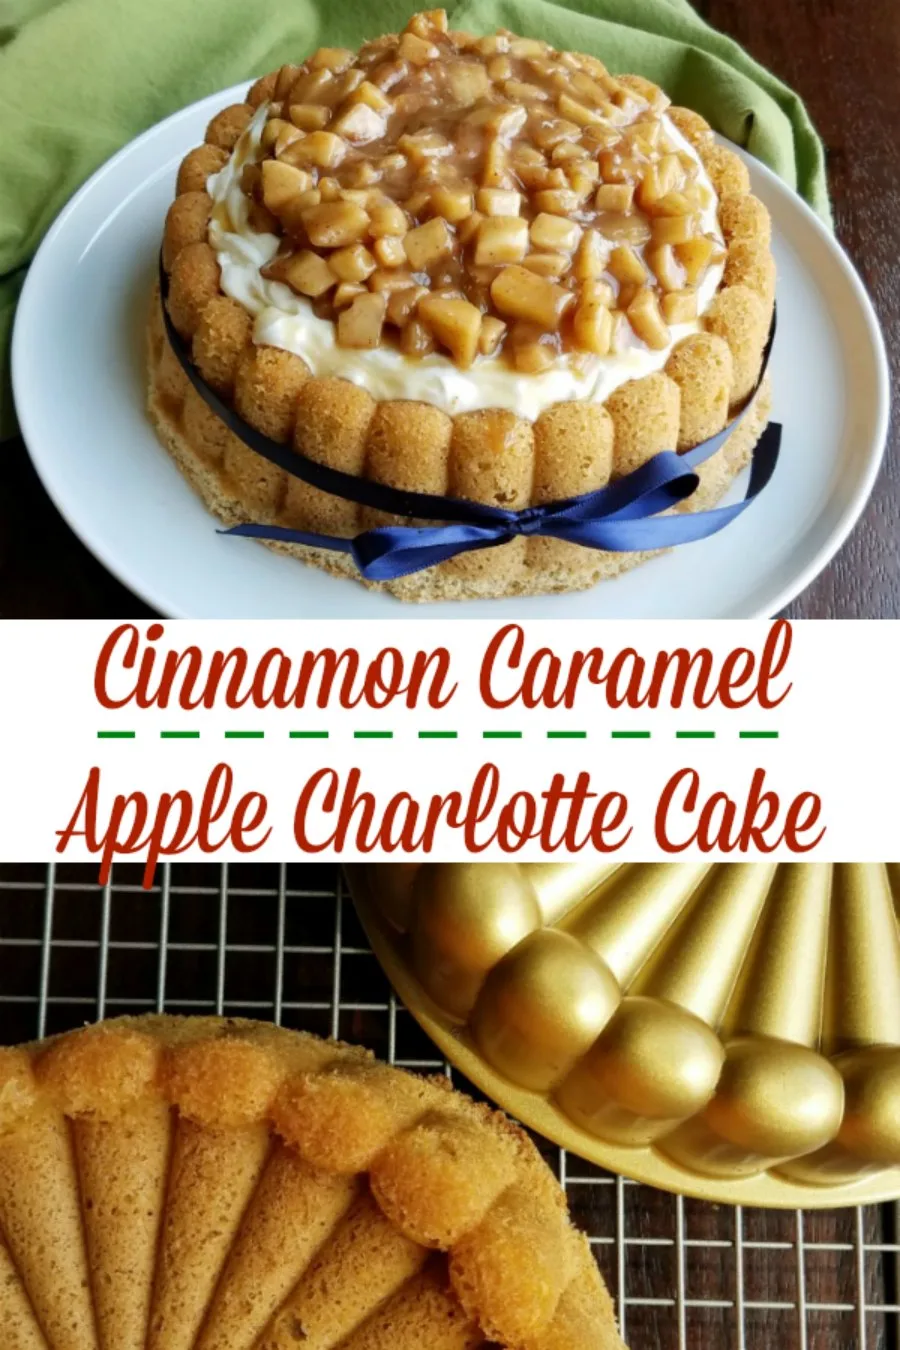 A cinnamon sponge cake in the shape of a classic Charlotte, topped with fluffy whipped cream cheese and plenty of cinnamon and caramel apples. It’s a perfect taste of sweet fall flavors!